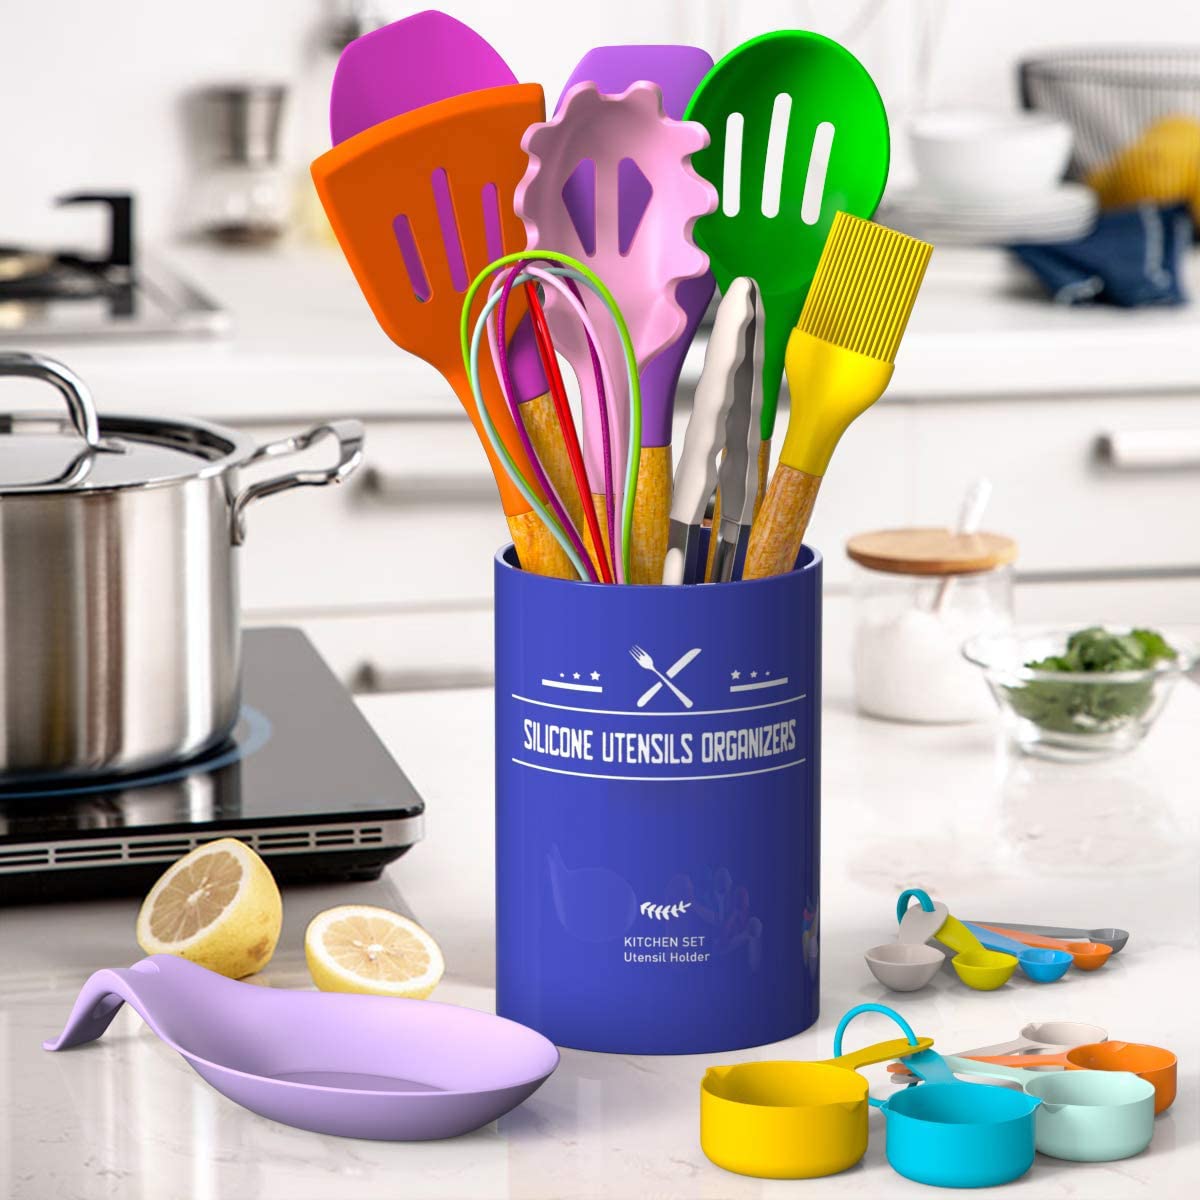 Umite Chef Kitchen Cooking Utensils Set, 33 pcs Non-stick Silicone Cooking Kitchen Utensils Spatula Set with Holder, Wooden Handle Silicone Kitchen Gadgets Utensil Set (Colorful)